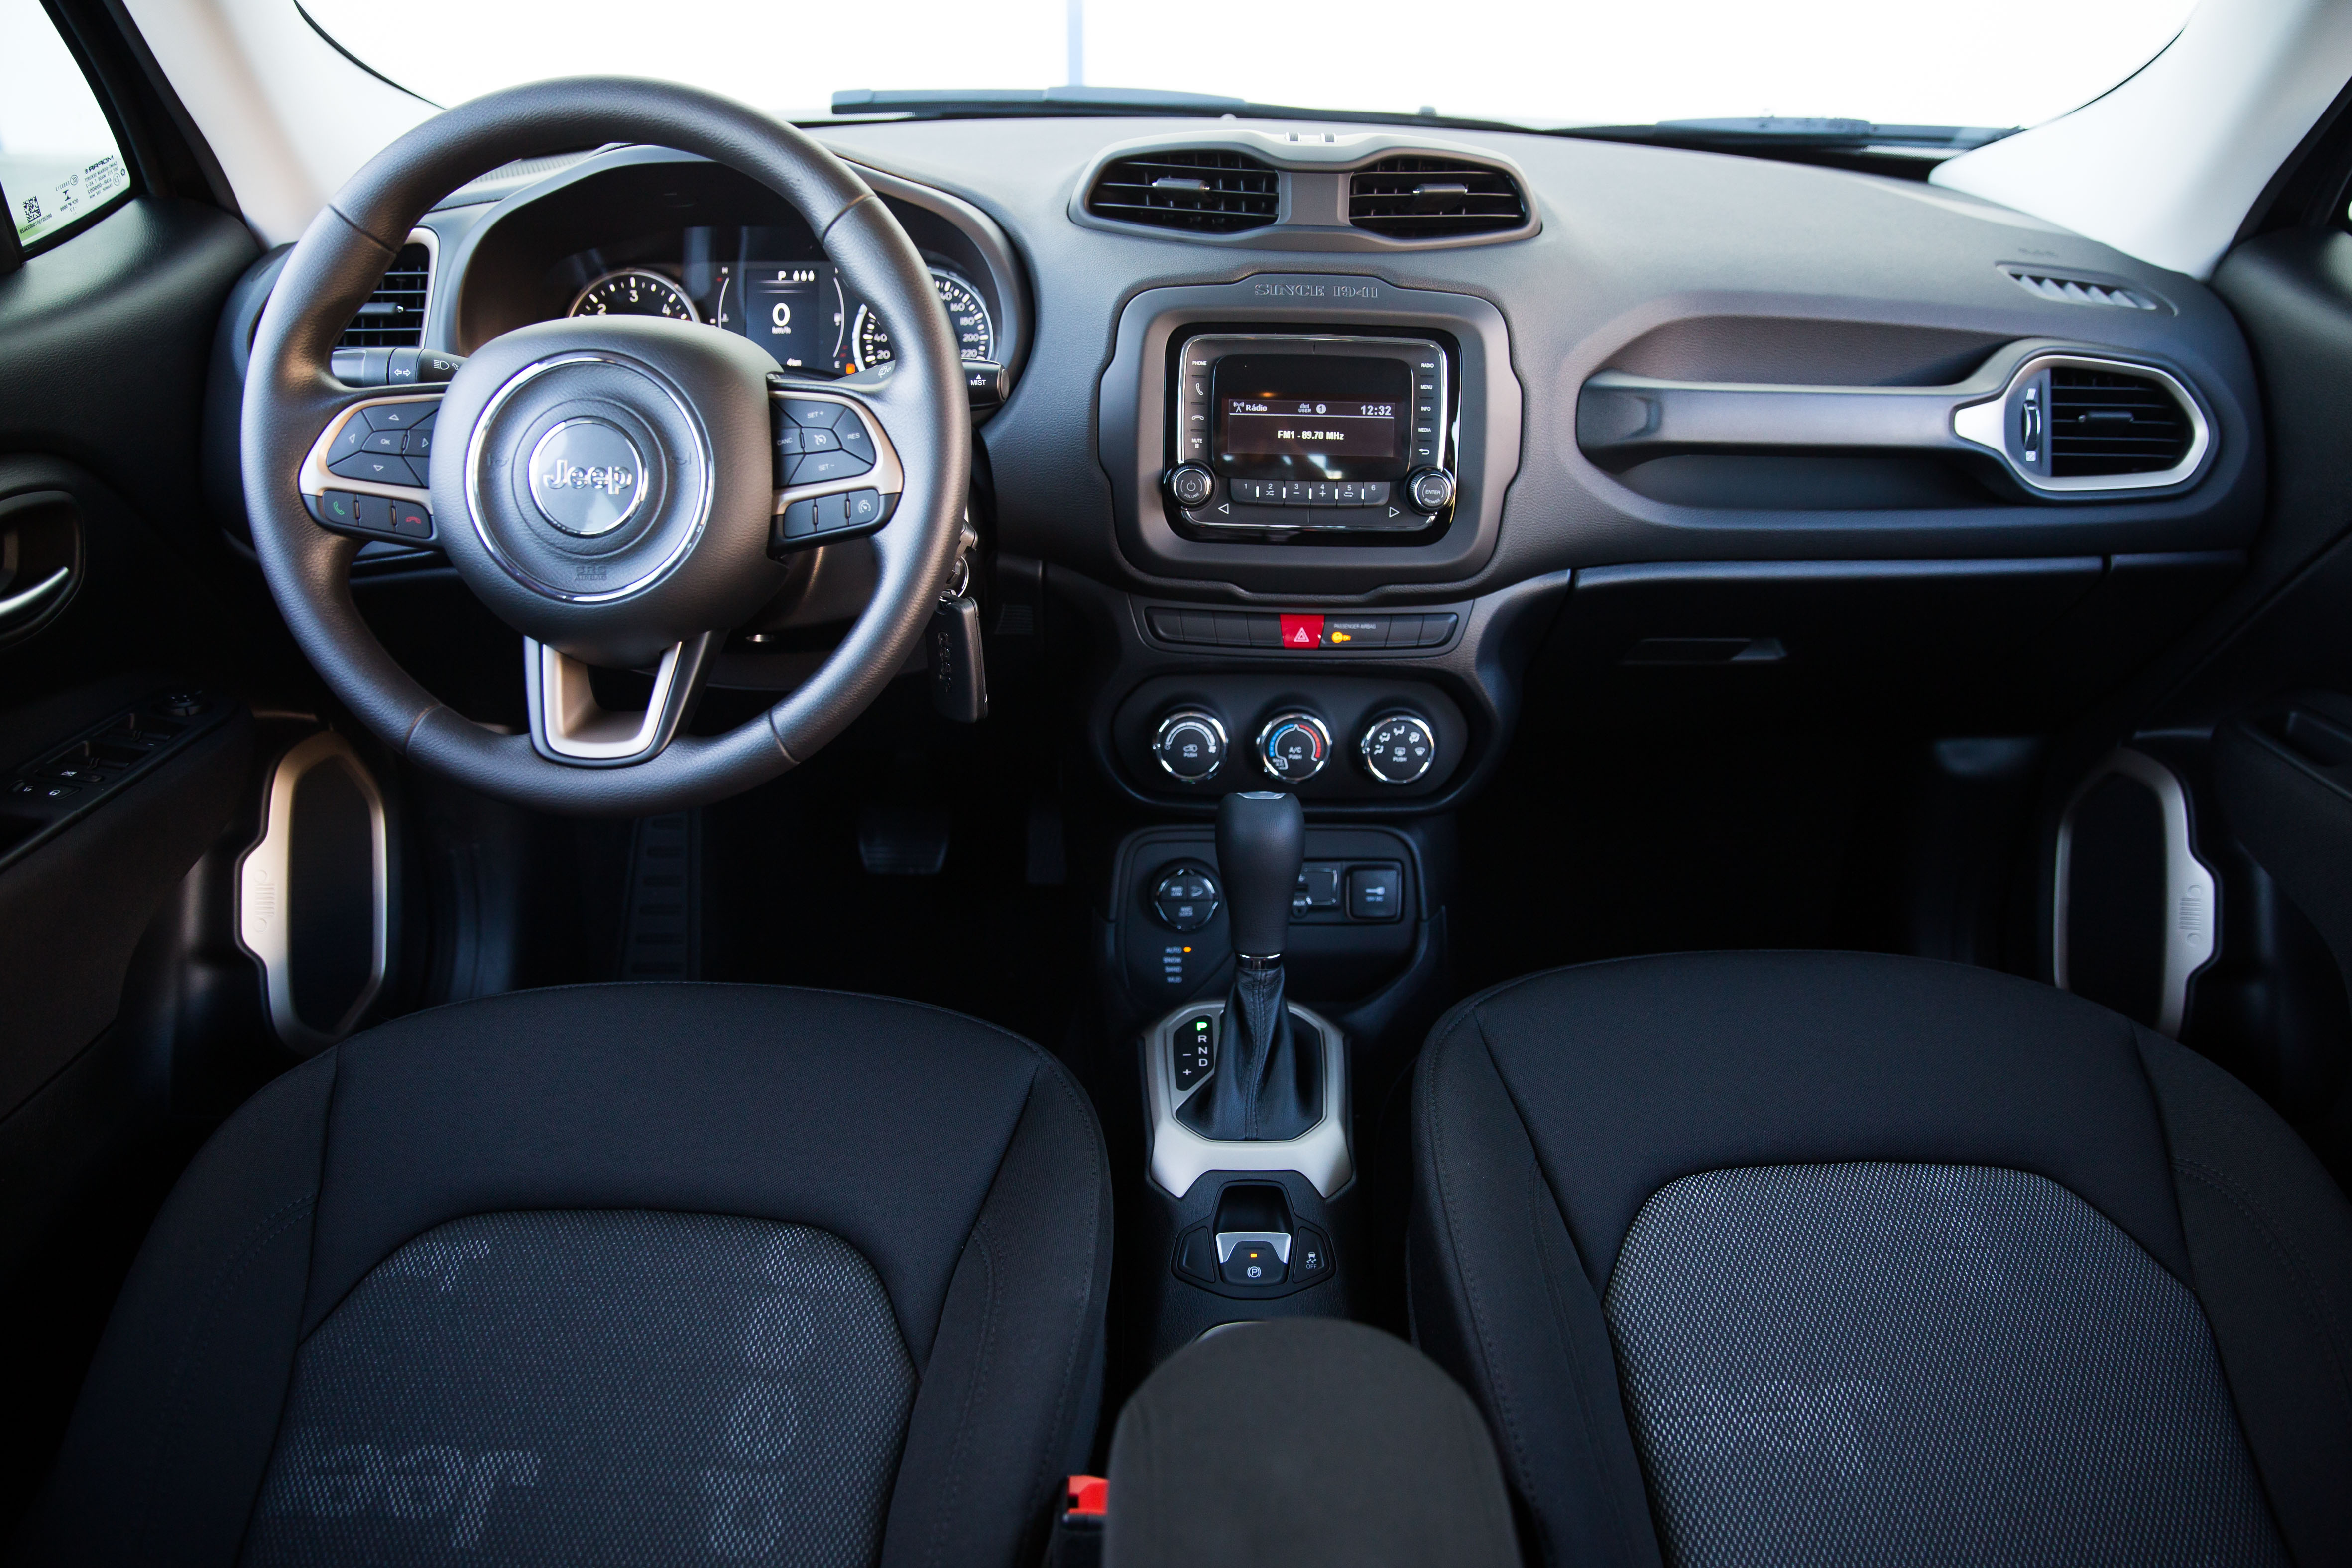 Jeep Renegade accessories specifications